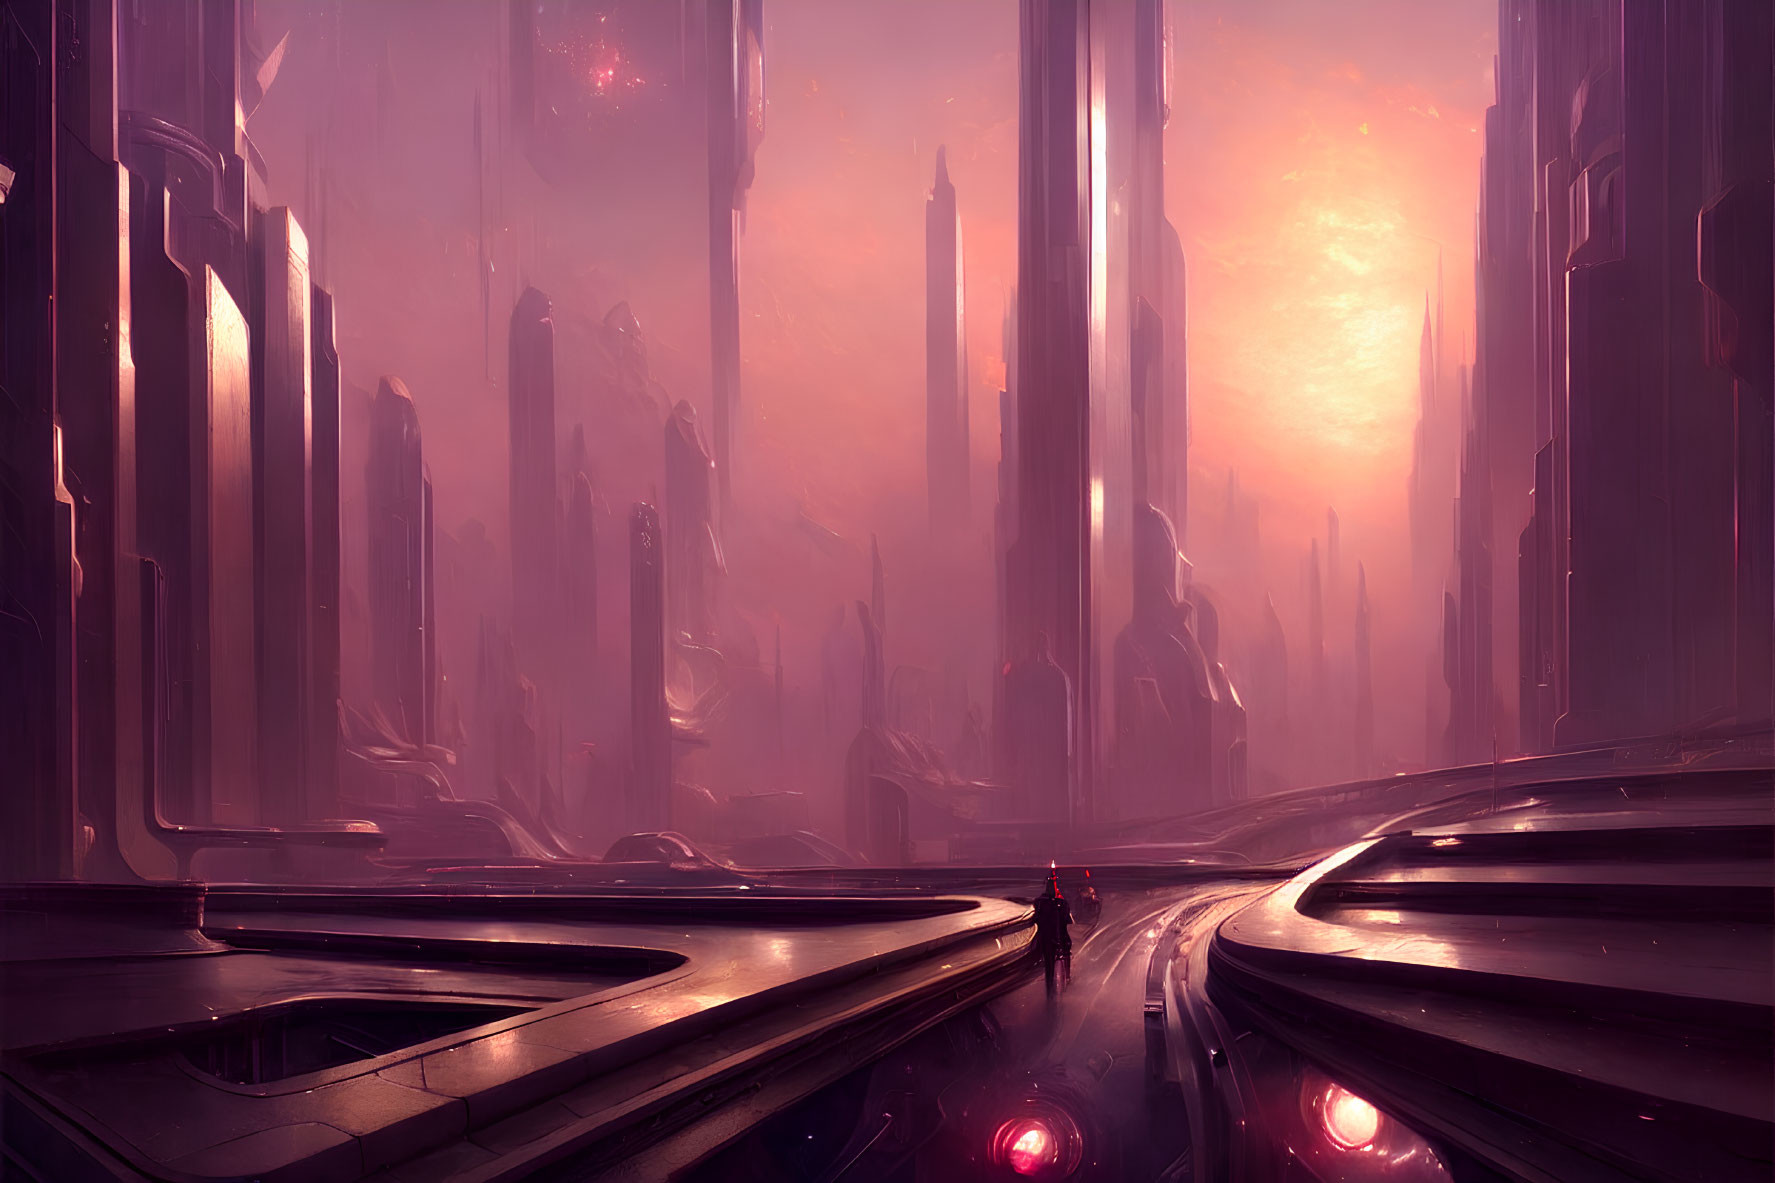 Futuristic cityscape with pink skyscrapers and lone figure